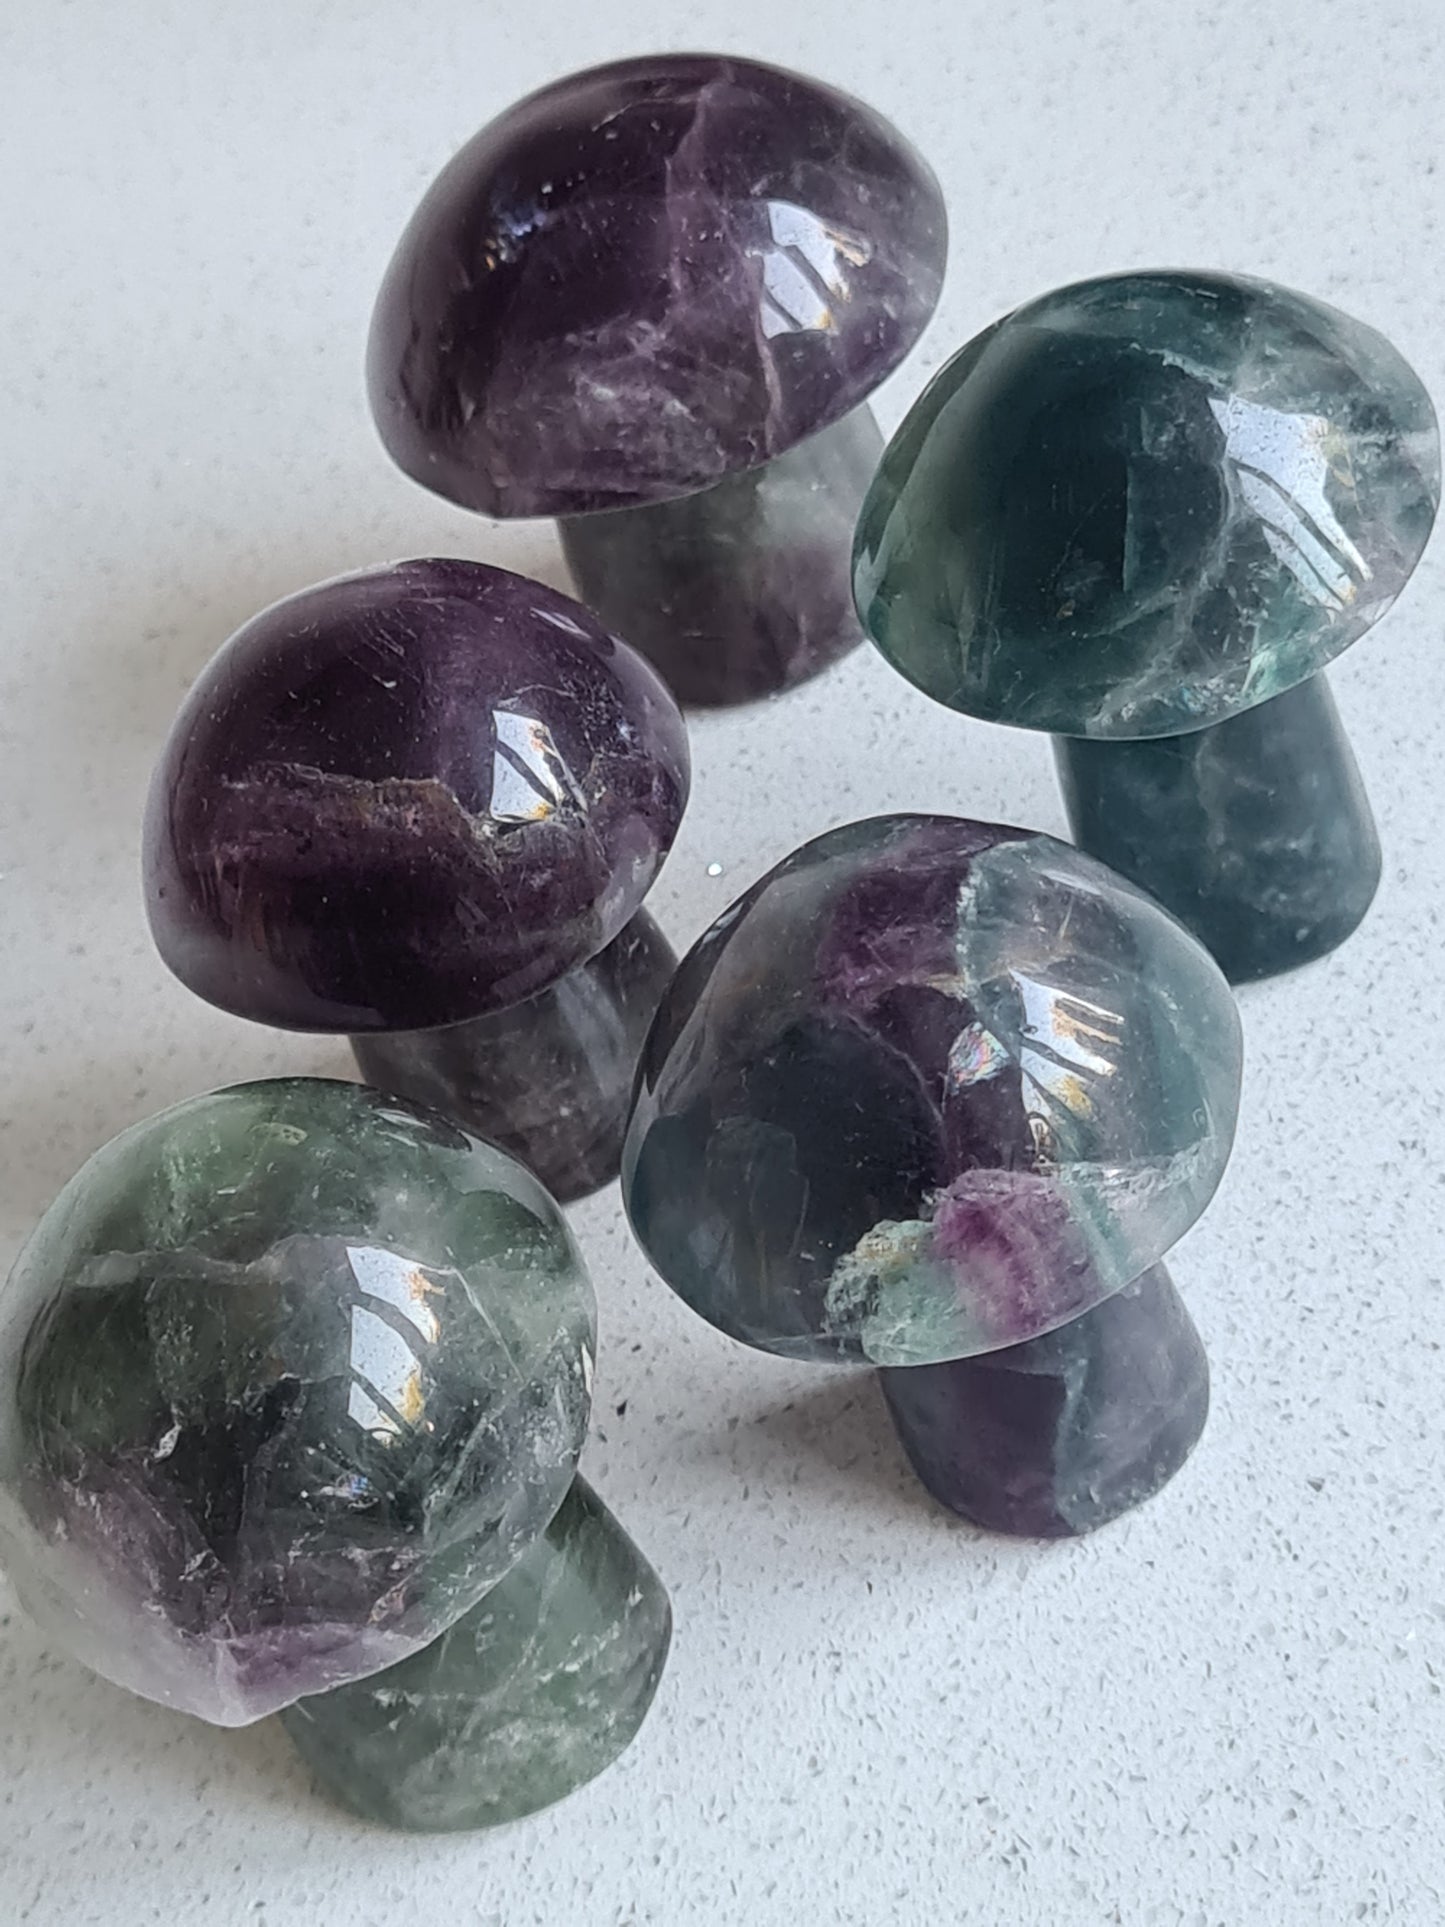 Rainbow Fluorite Mushroom Carving in colours of green, purple with some blue banding.